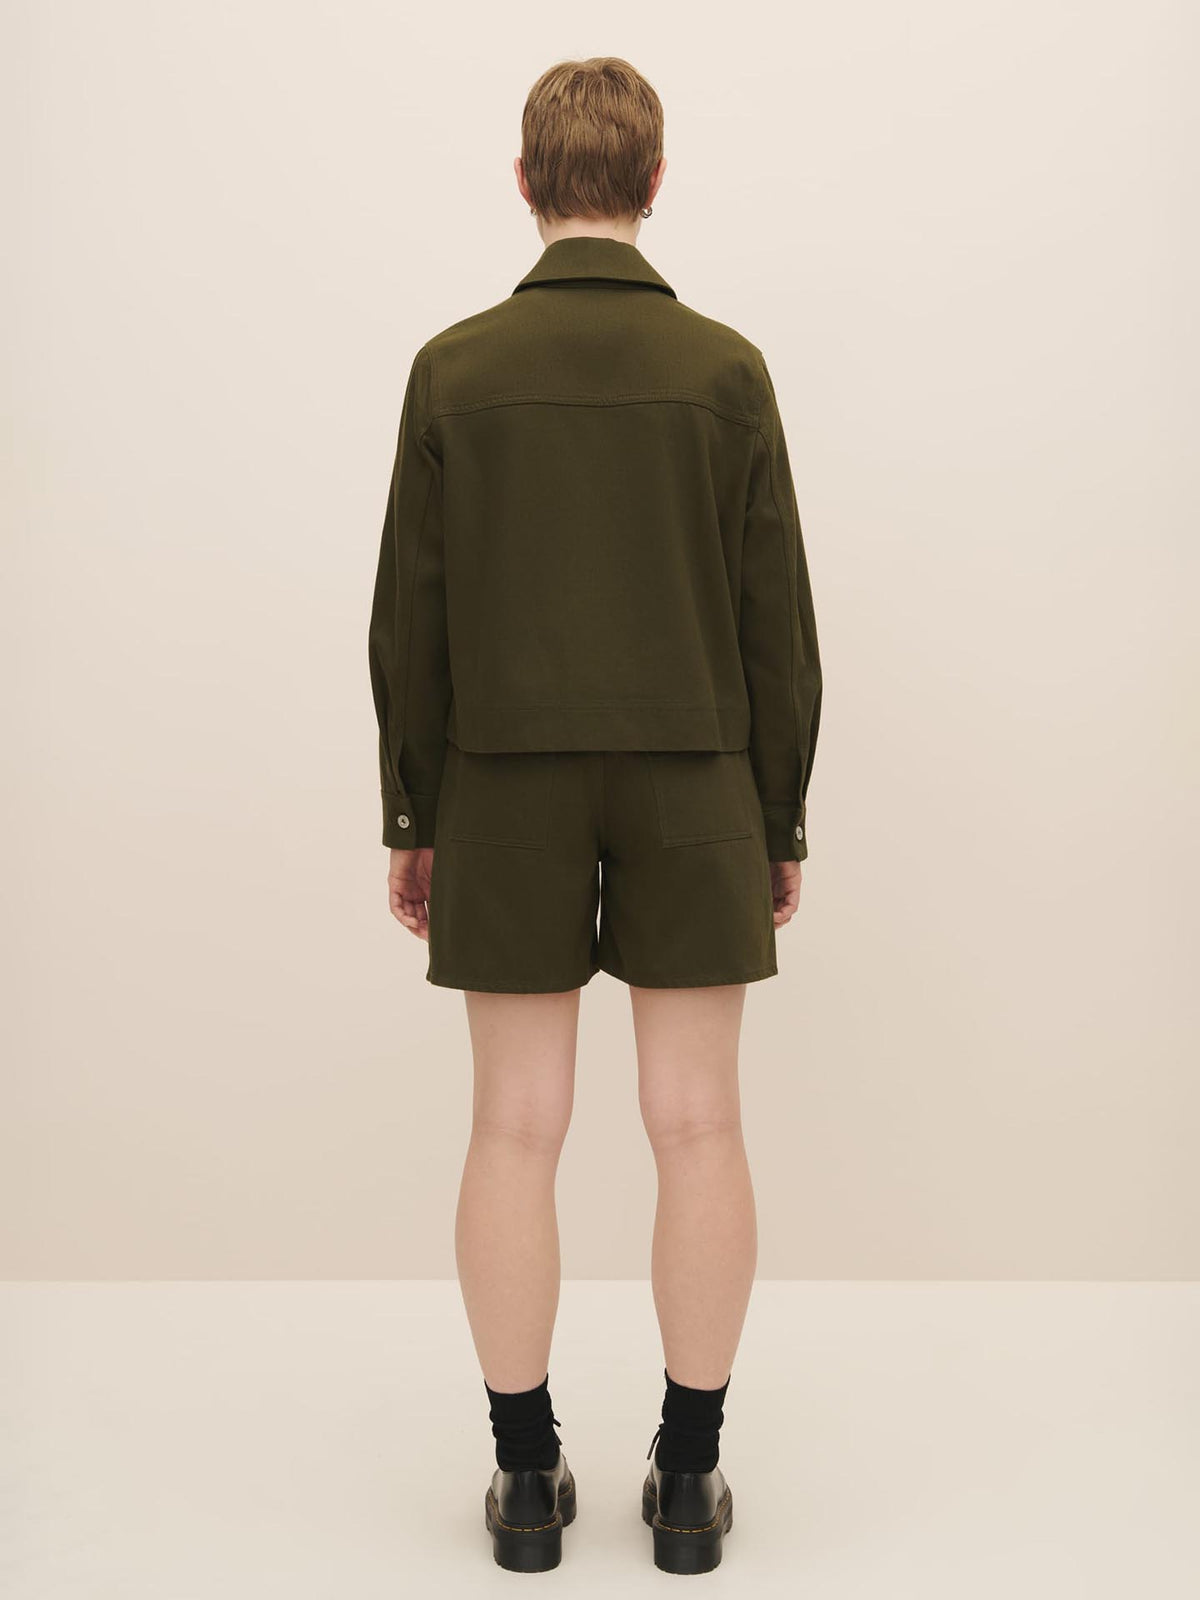 Person standing with their back to the camera, wearing a Kowtow Mirror Jacket in Khaki Denim and matching shorts with black socks and boots. For the perfect fit, refer to our size guide.